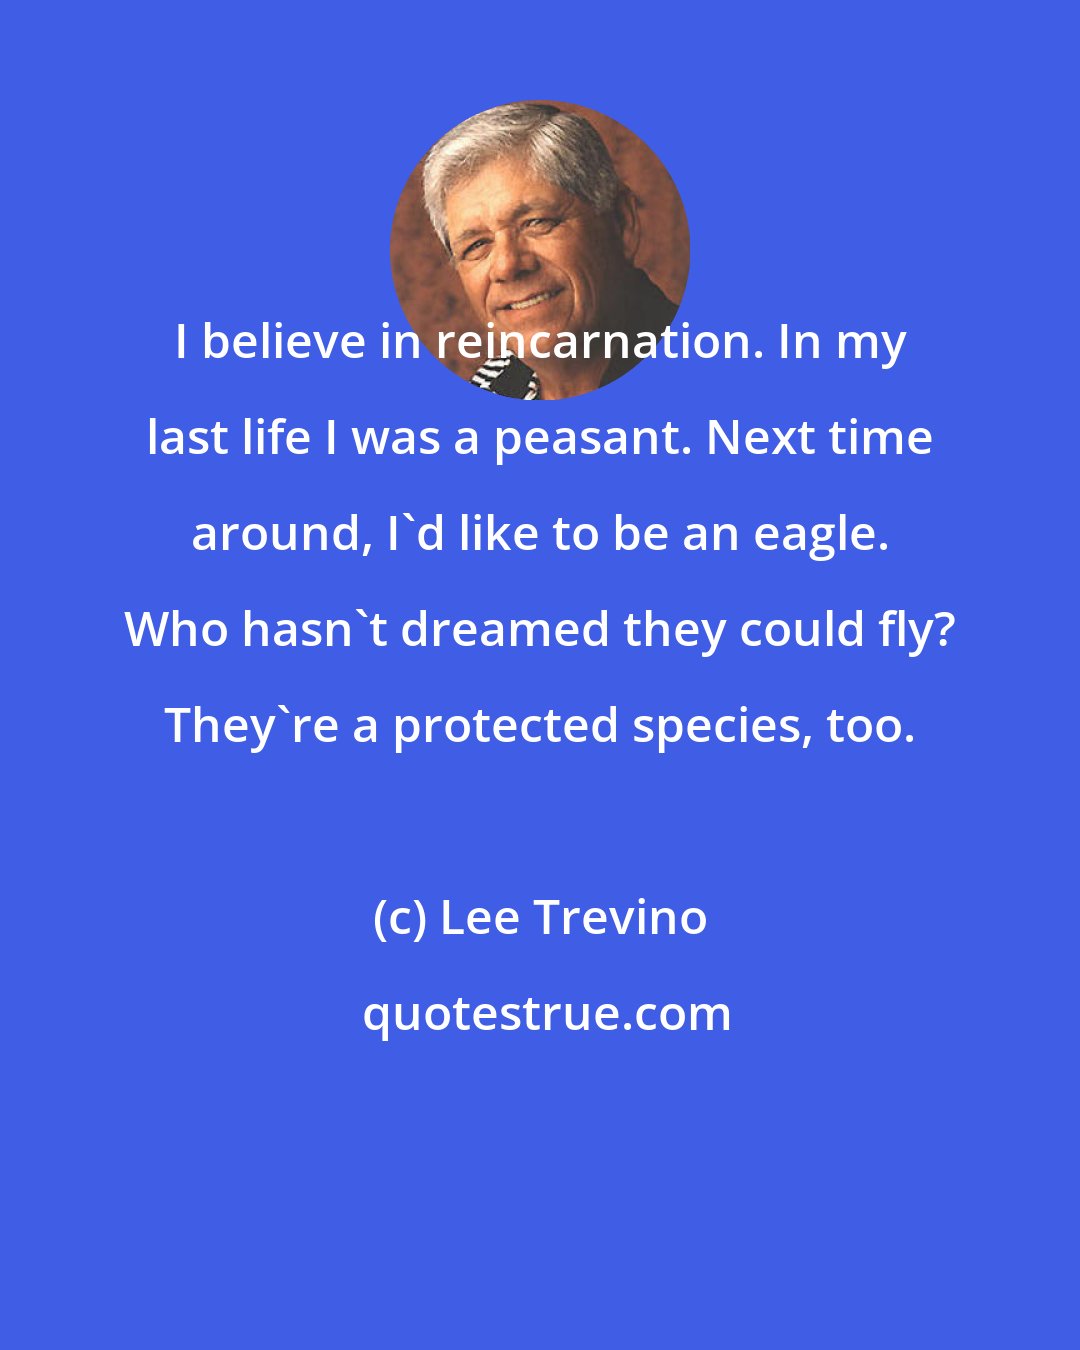 Lee Trevino: I believe in reincarnation. In my last life I was a peasant. Next time around, I'd like to be an eagle. Who hasn't dreamed they could fly? They're a protected species, too.